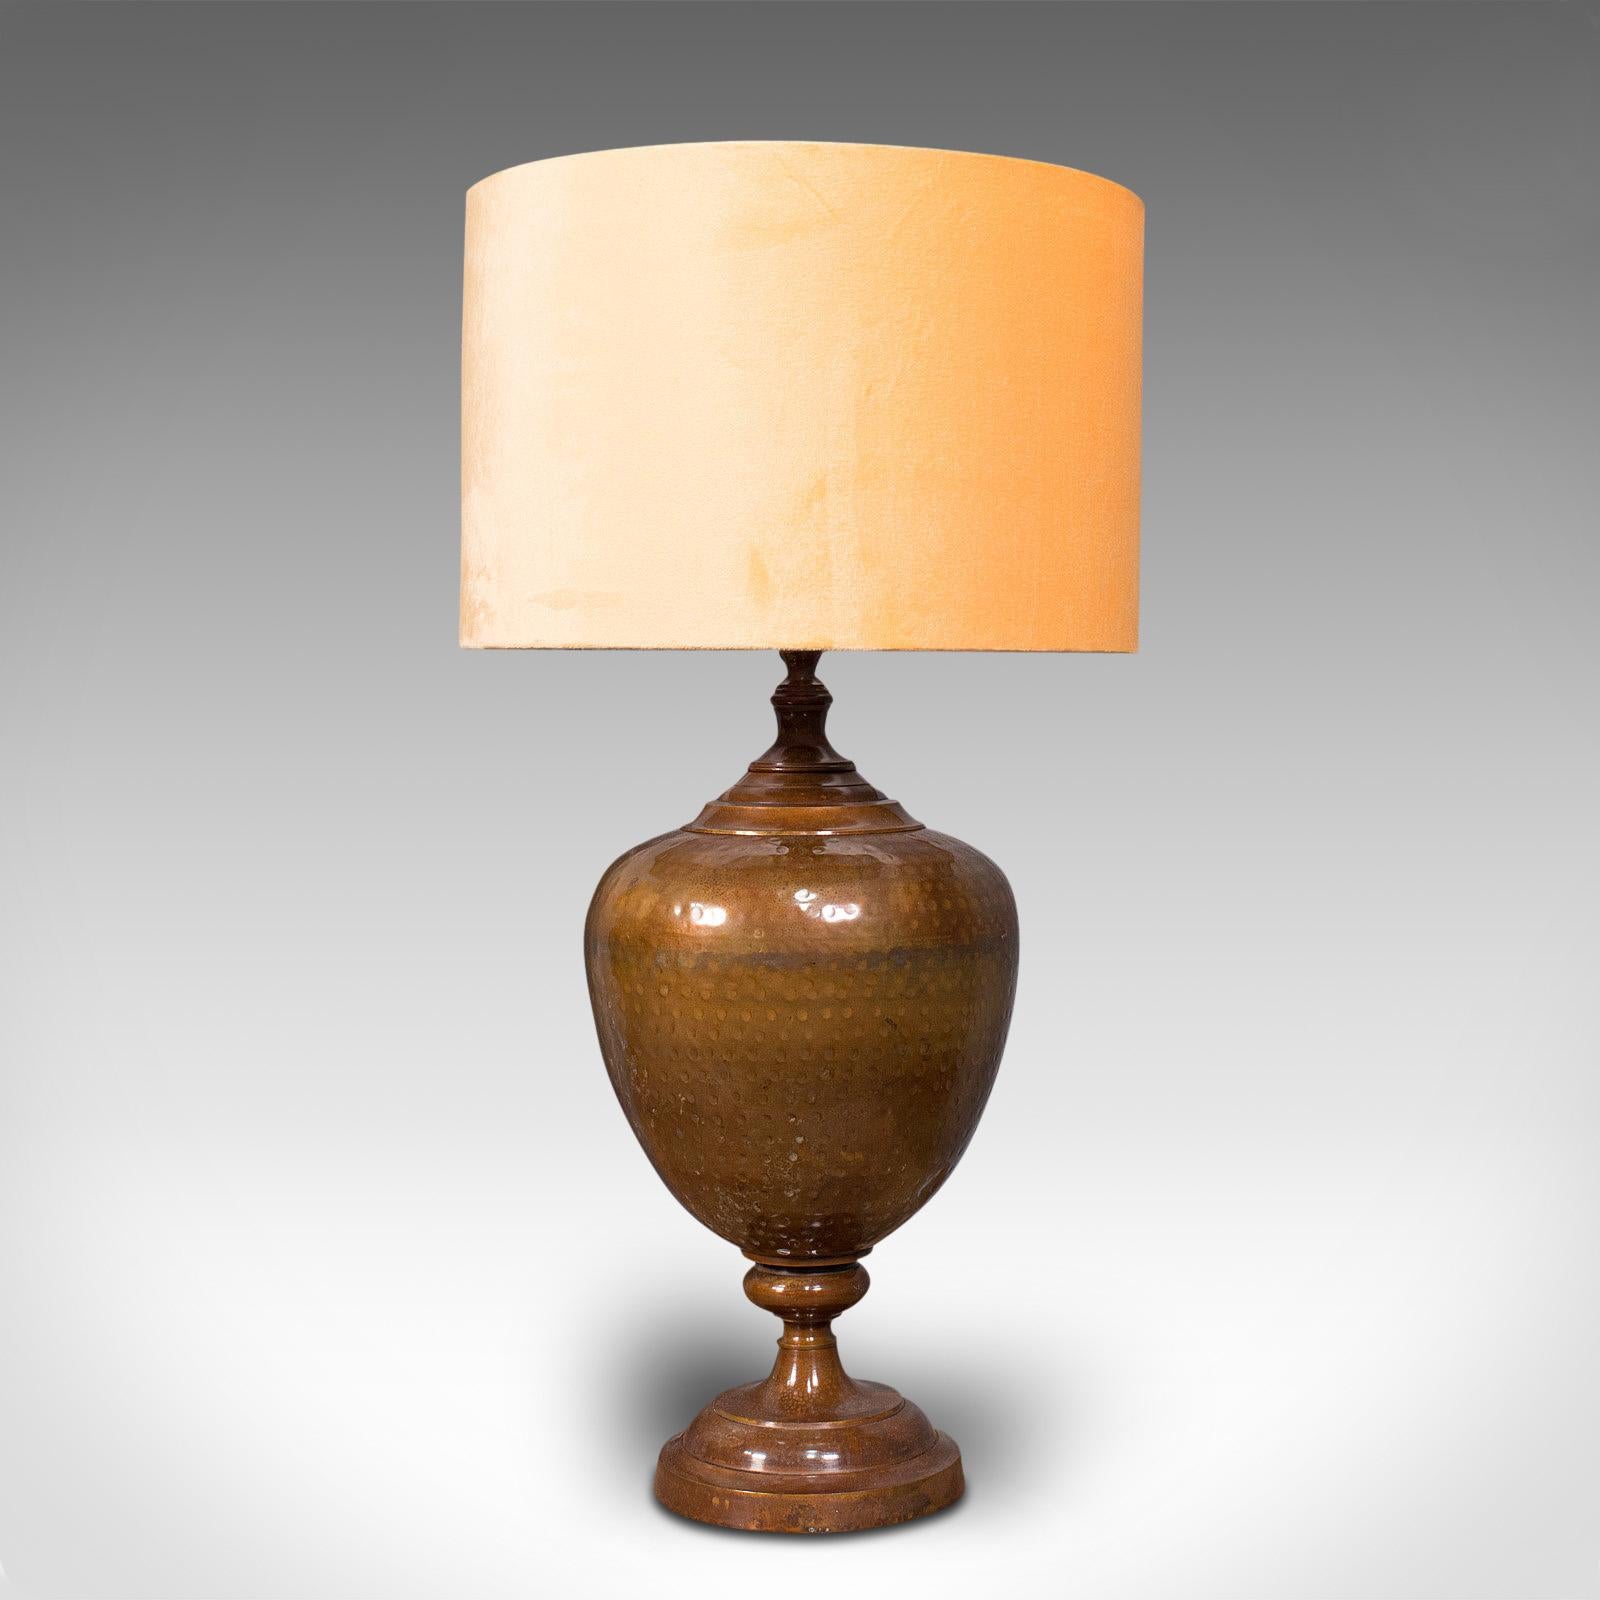 20th Century Pair of Vintage Table Lamps, English, Brass, Decorative, Side Light, Circa 1940